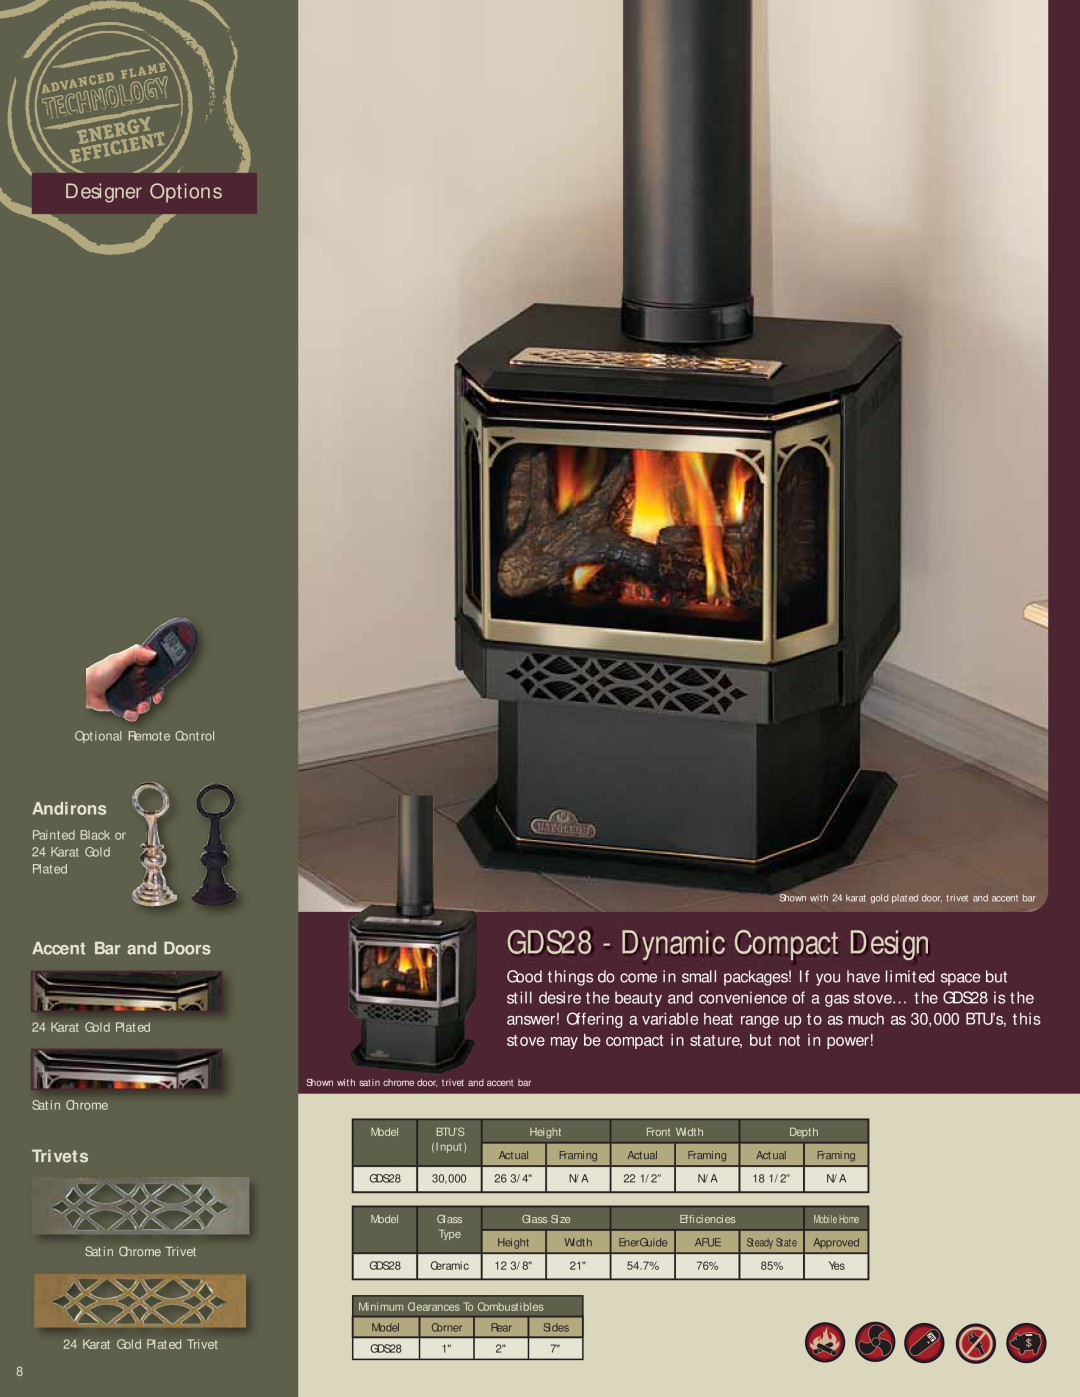 Napoleon Fireplaces Gas Burning Stoves GDS28 - Dynamic Compact Design, Accent Bar and Doors, Trivets, Designer Options 